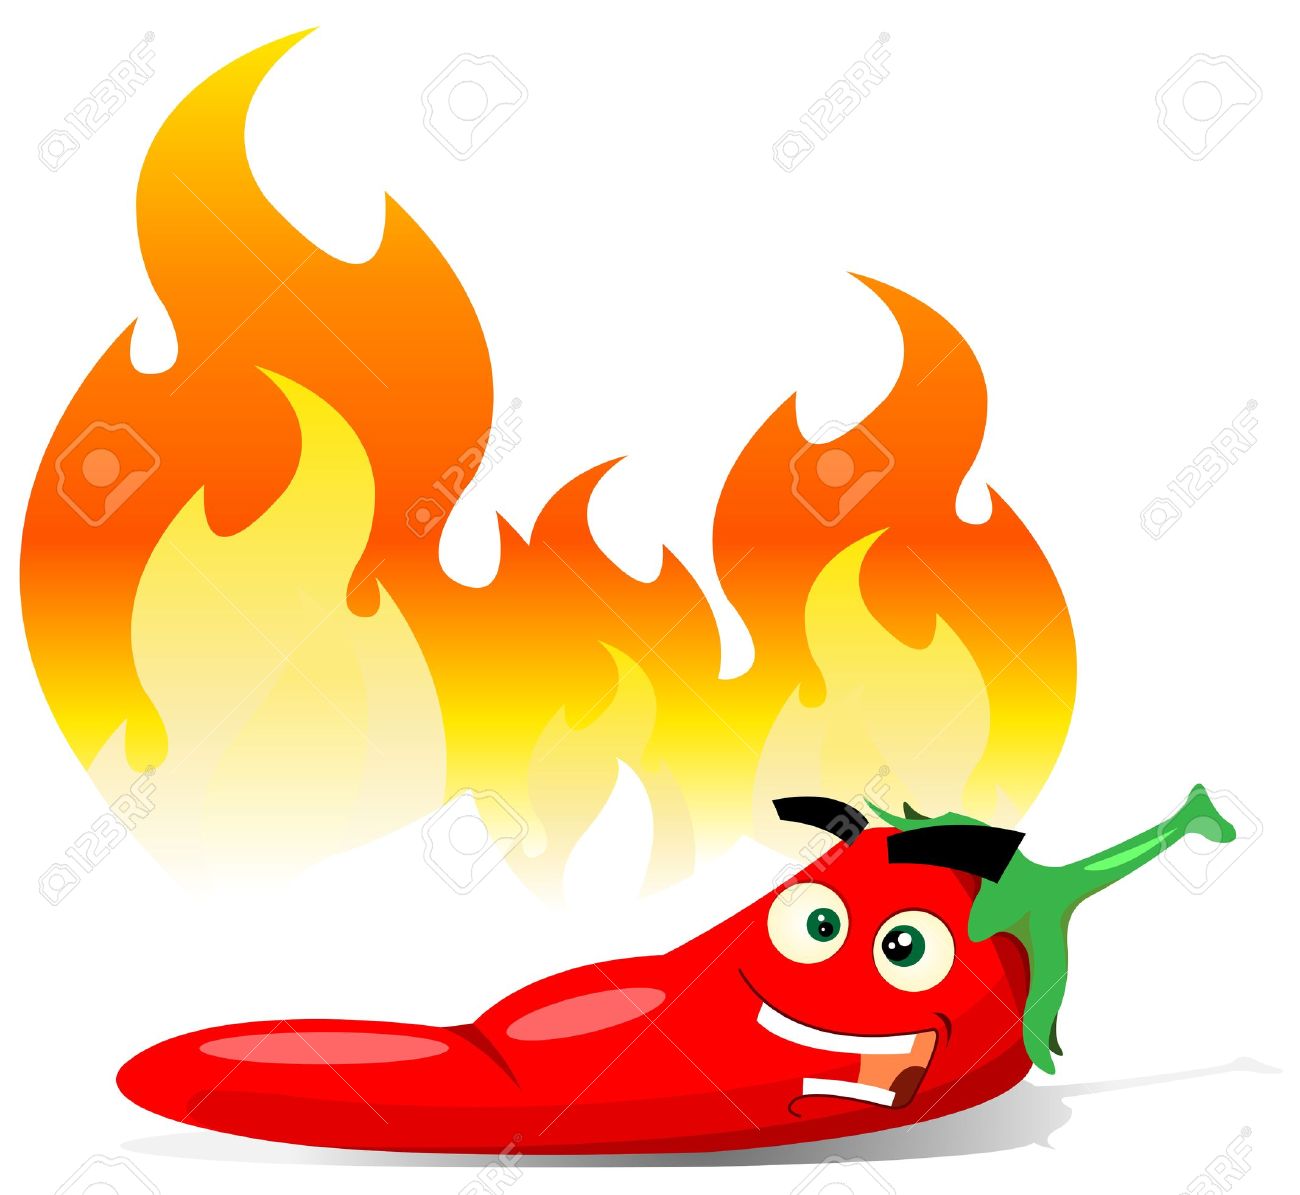 11,930 Hot Pepper Cliparts, Stock Vector And Royalty Free Hot.